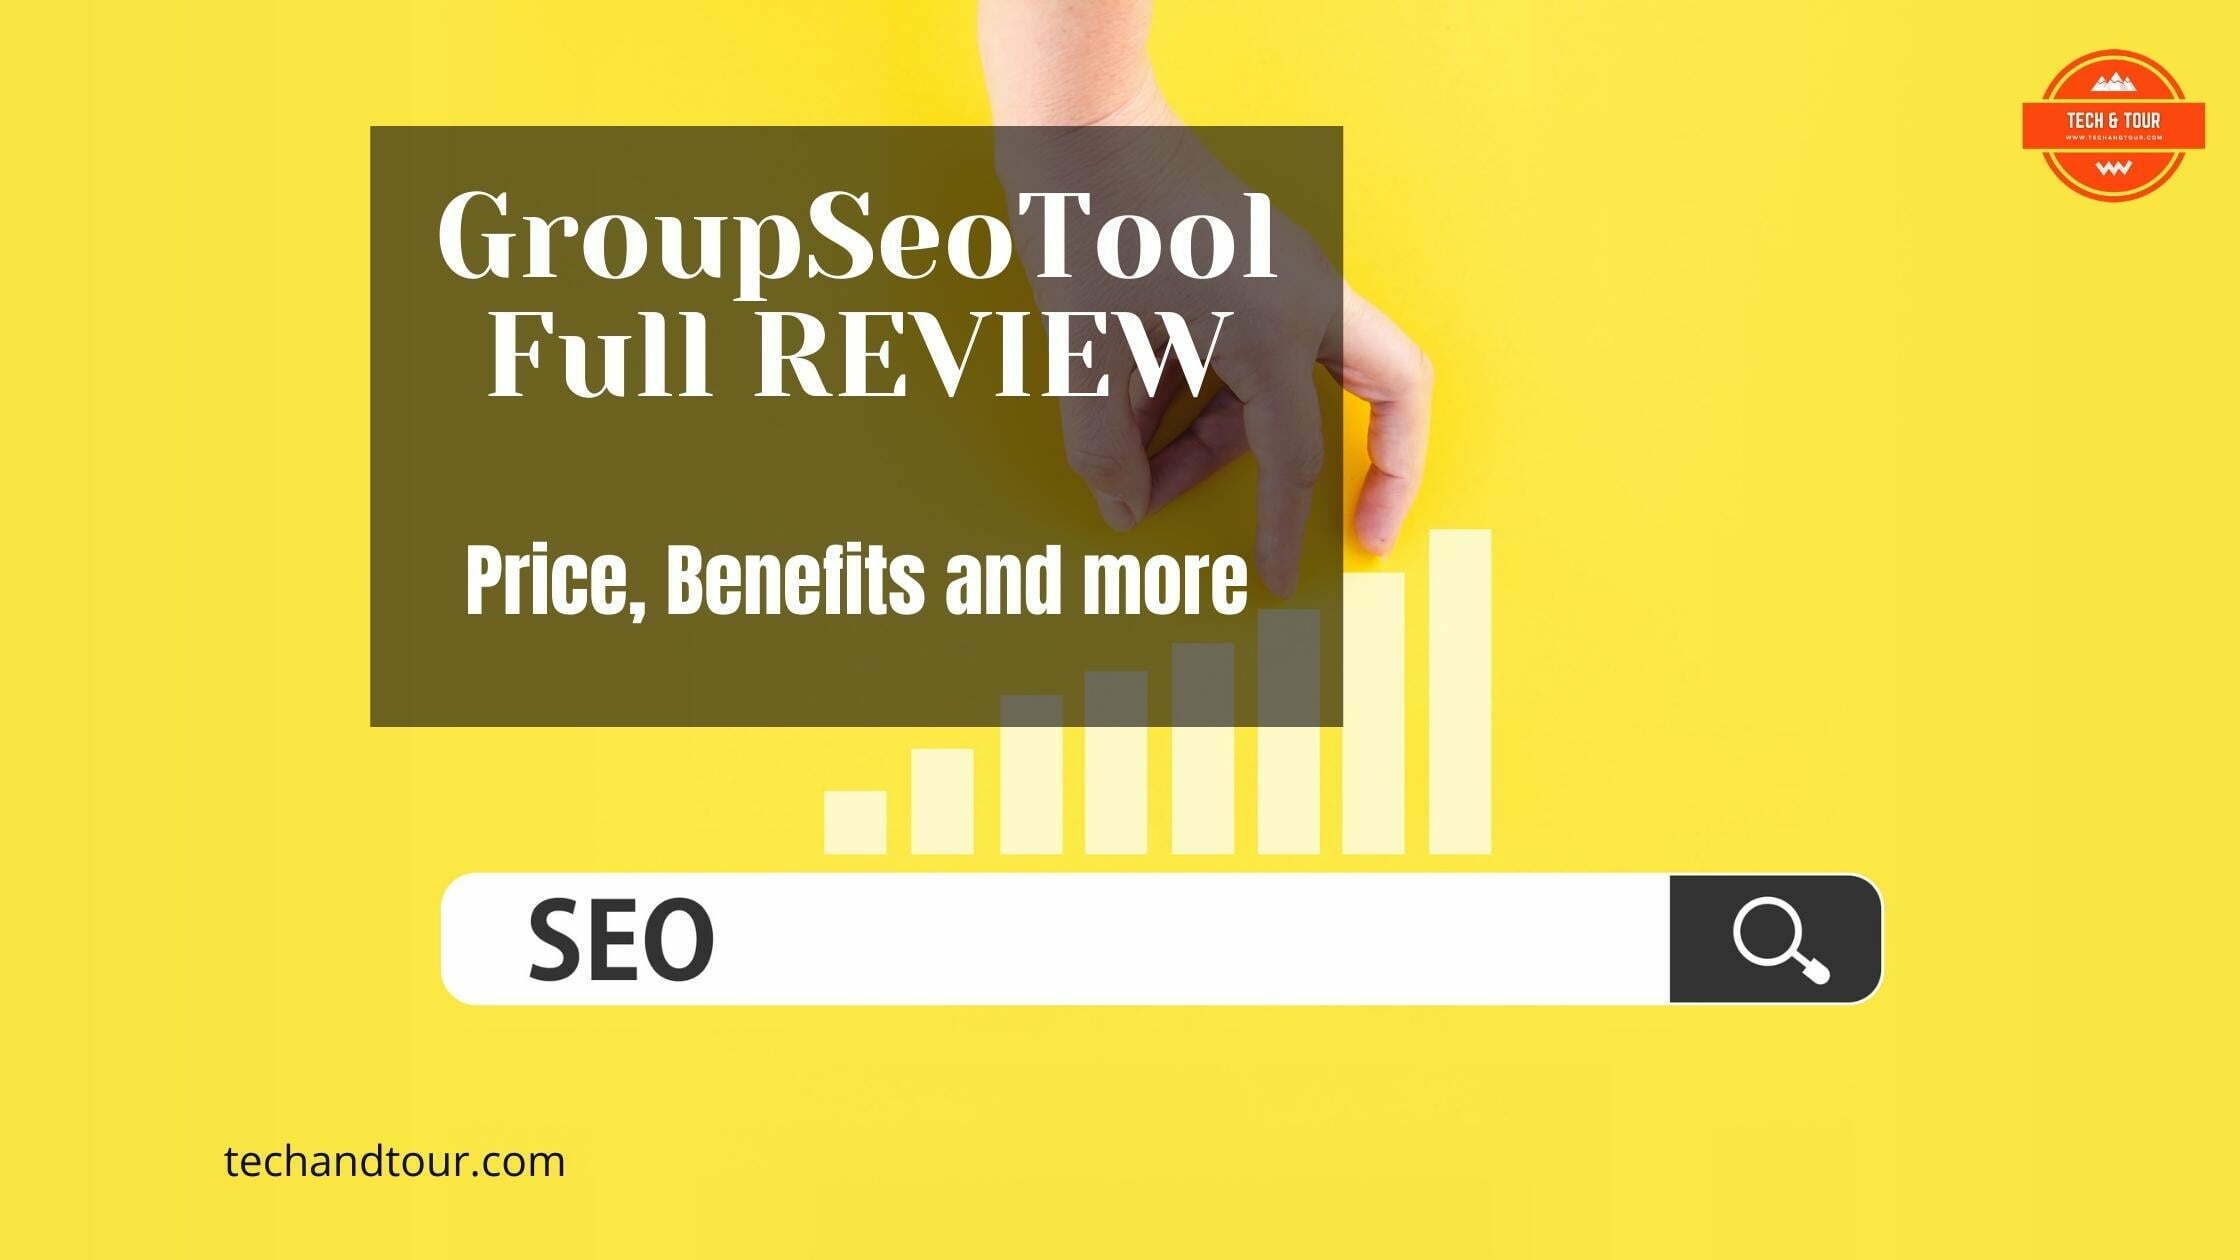 GroupSeoTool Full REVIEW